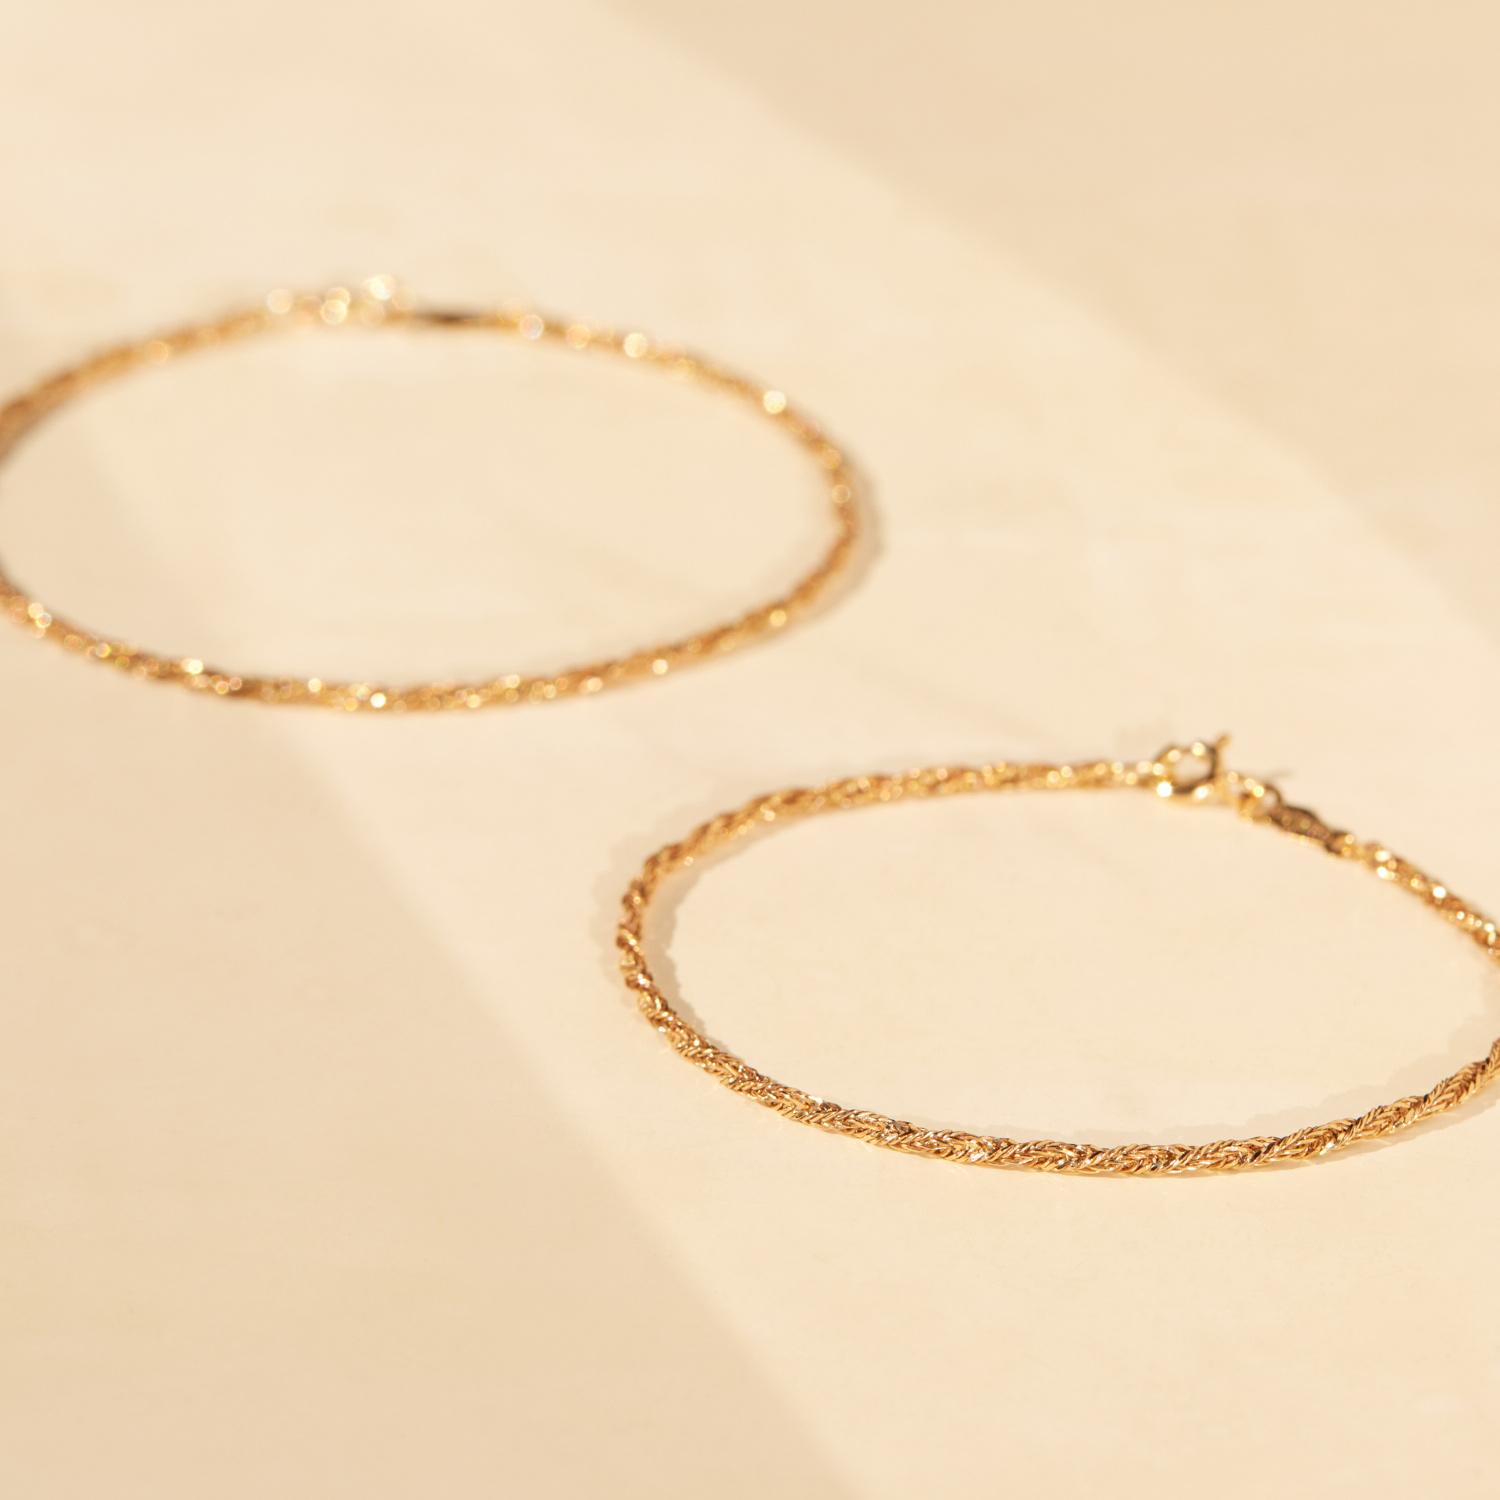 catbird lover's bracelet, one of the best valentine's day gifts for couples